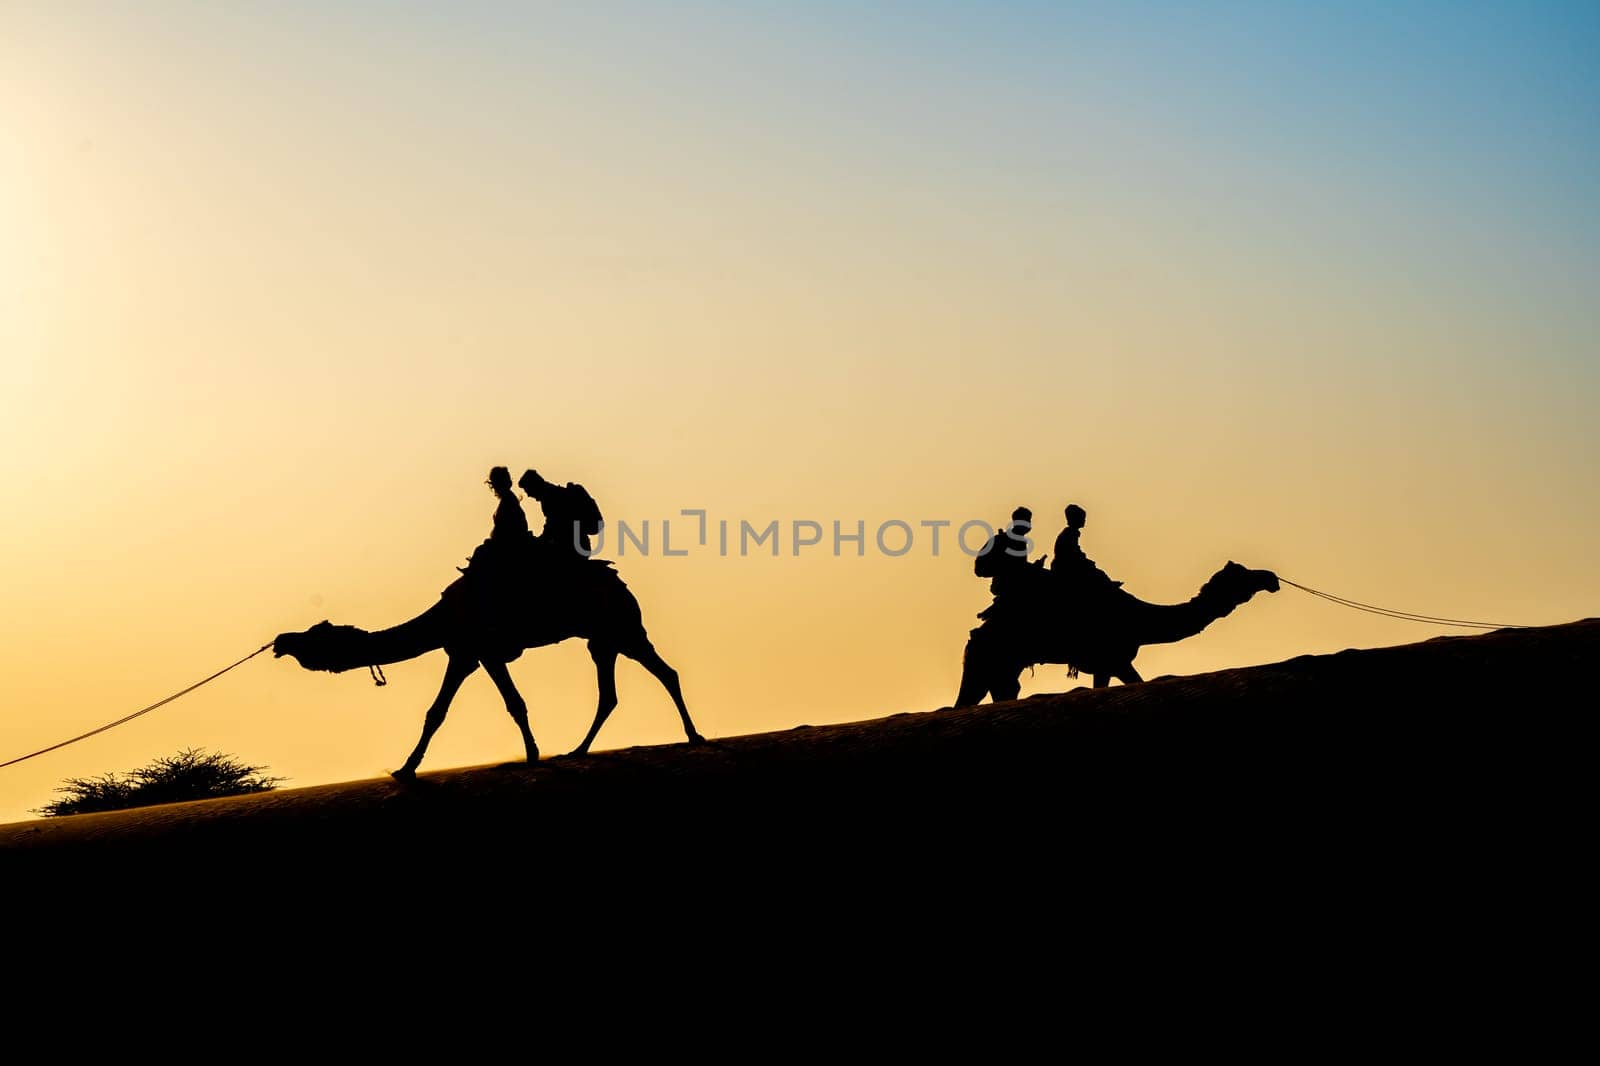 Silhouette of camel with two people sitting on it crossing over sand dunes in Sam Jaisalmer Rajasthan India by Shalinimathur